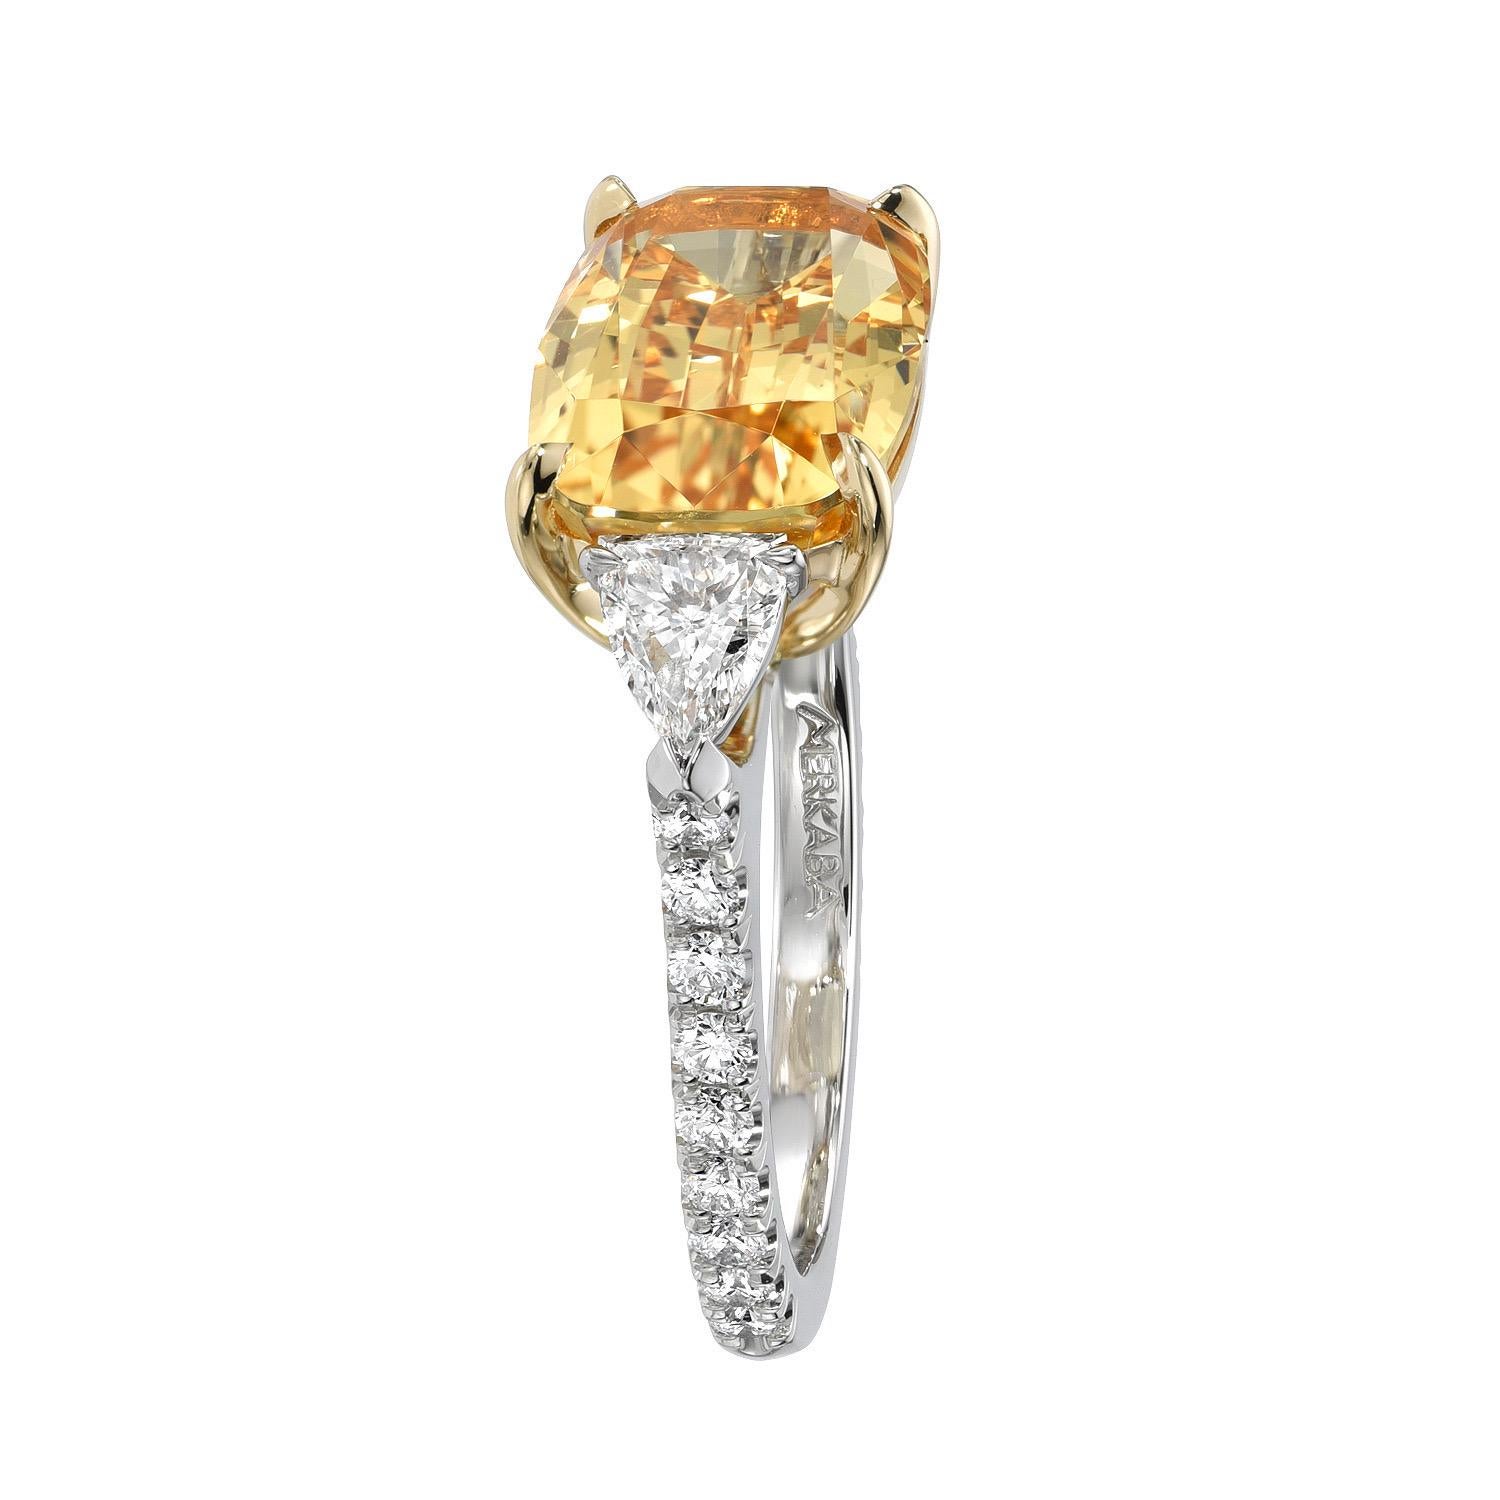 Contemporary Imperial Topaz Ring 6.59 Carat Cushion For Sale